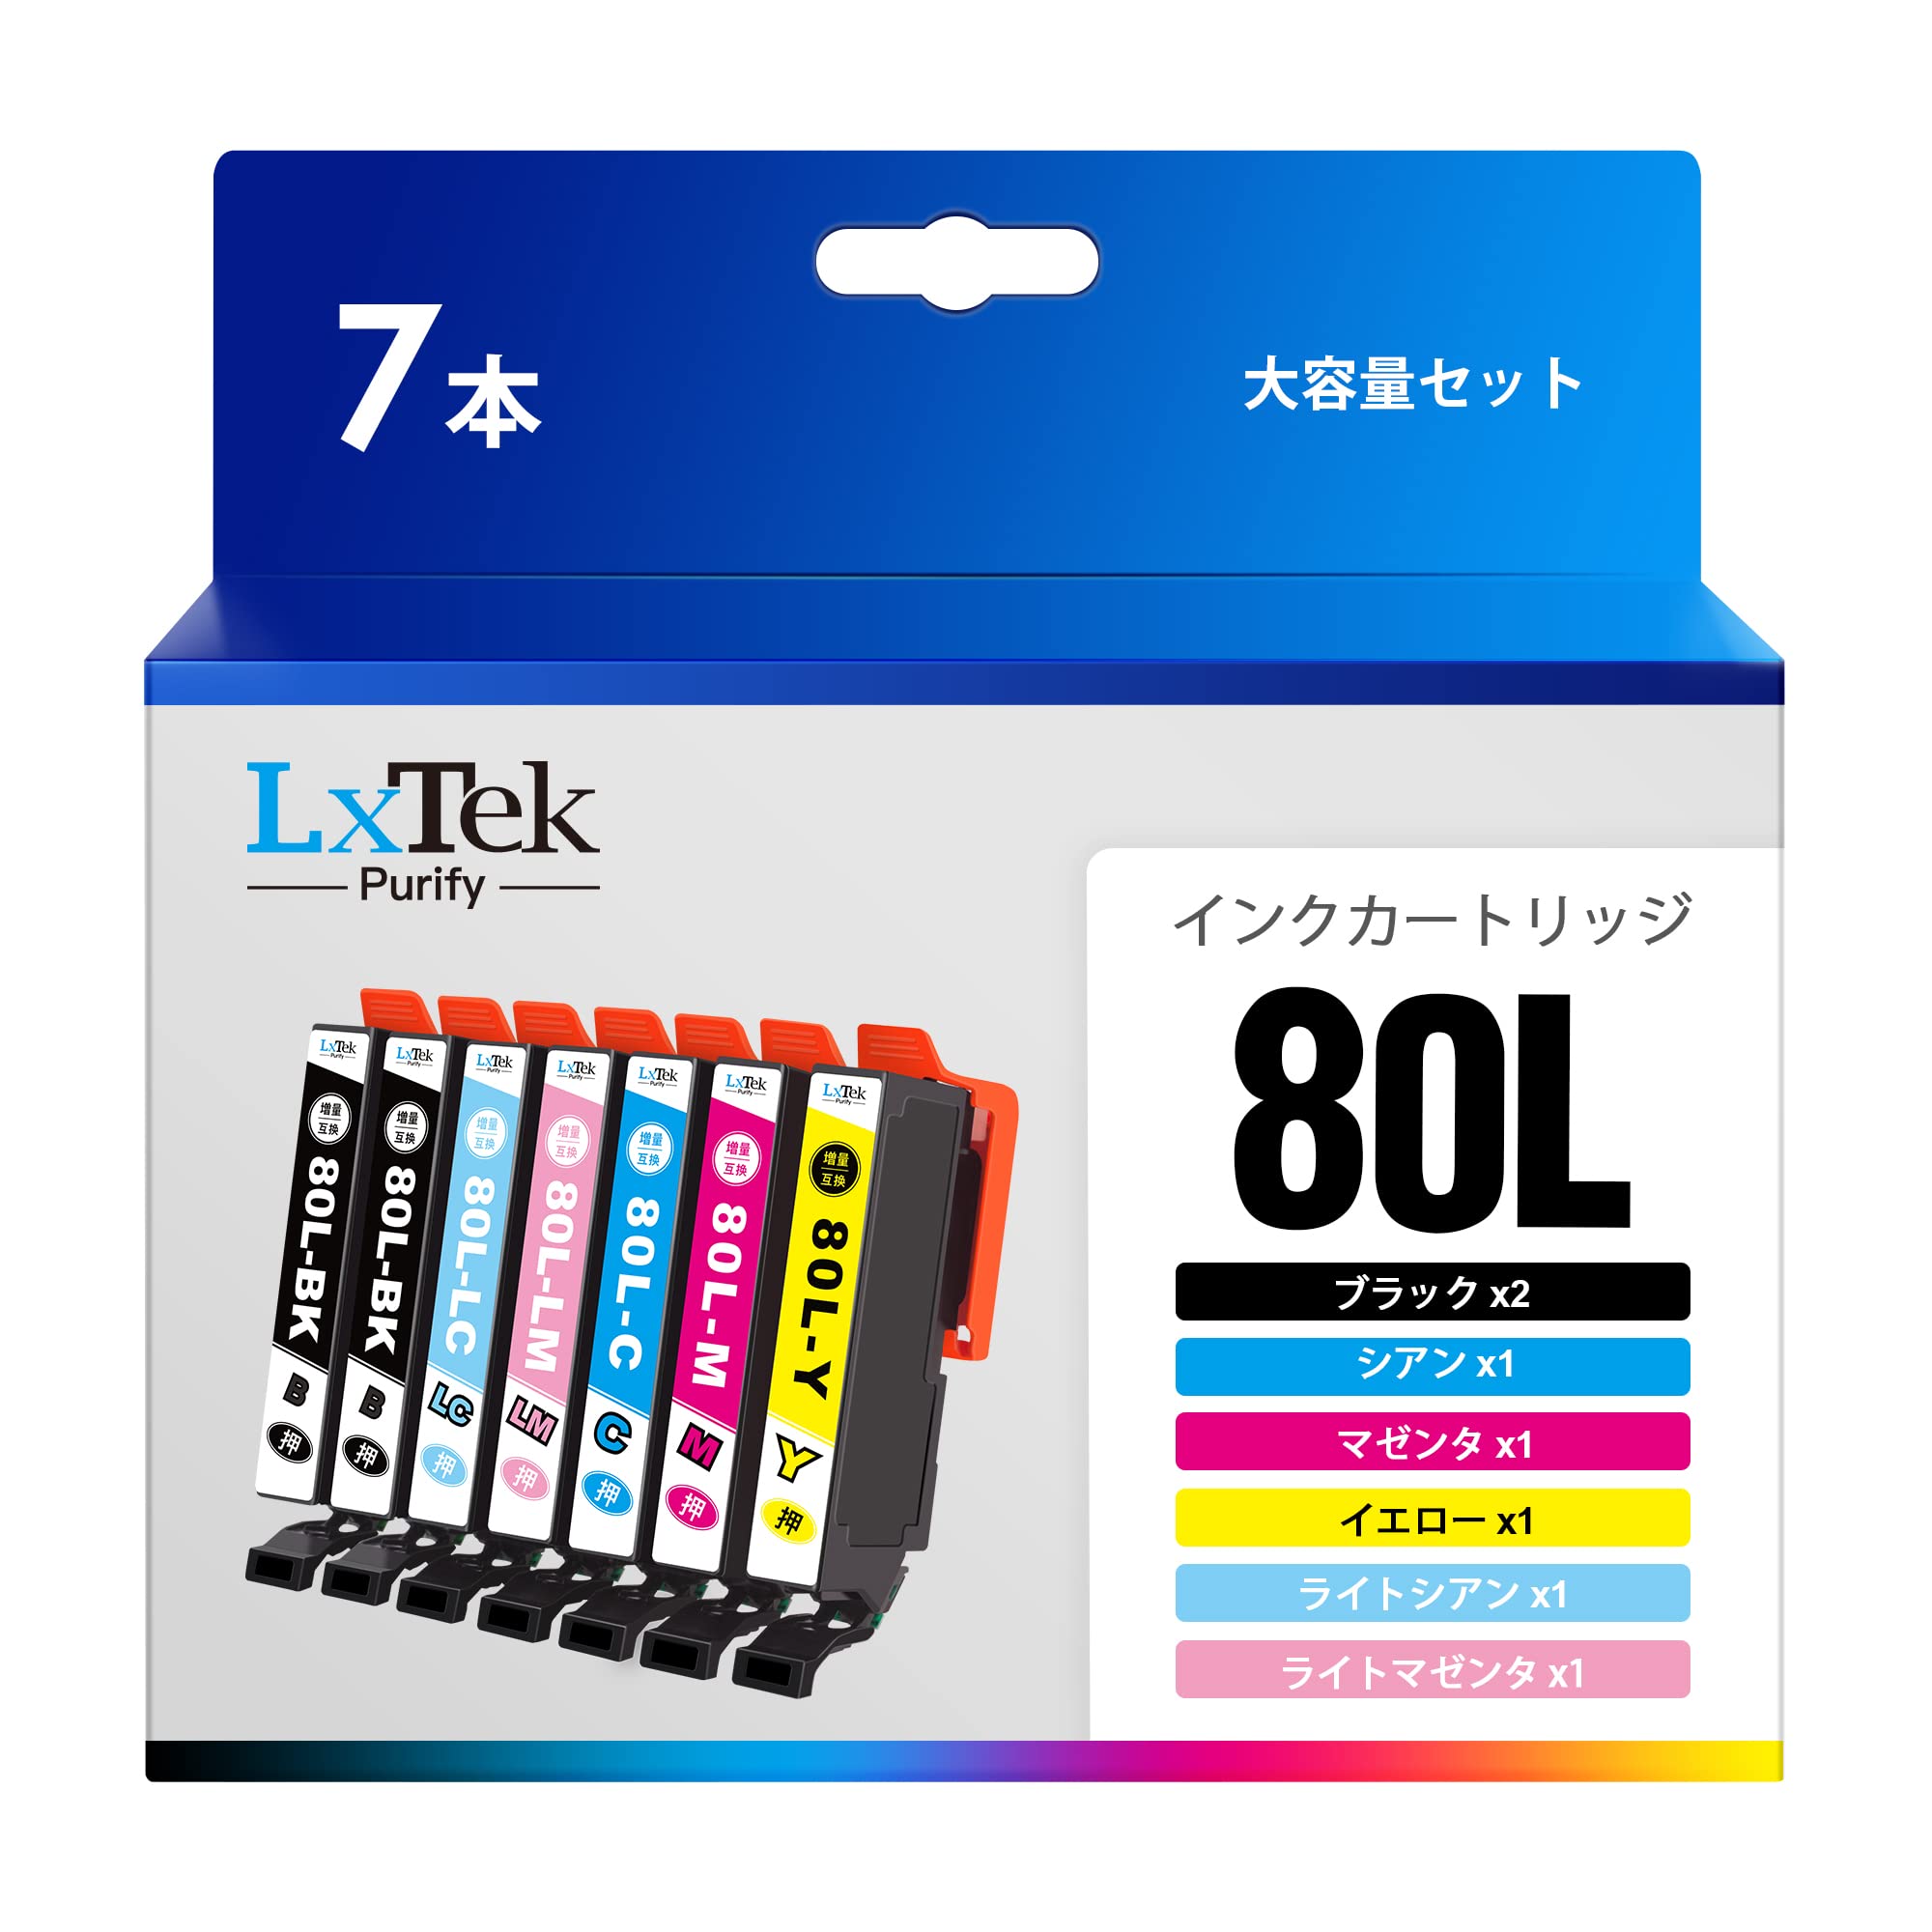 LxTek Purify IC6CL80L 7本セット (6色セット+黒1本) 互換インクカートリッジ エプソン (Epson) 対応 80L とうもろこし インク 対応型番: EP-982A3 EP-707A EP-708A EP-777A EP-807 EP-808 EP-907F EP-977A3 EP-978A3 EP-979A3 大容量/説明書付/残量表示/個包装